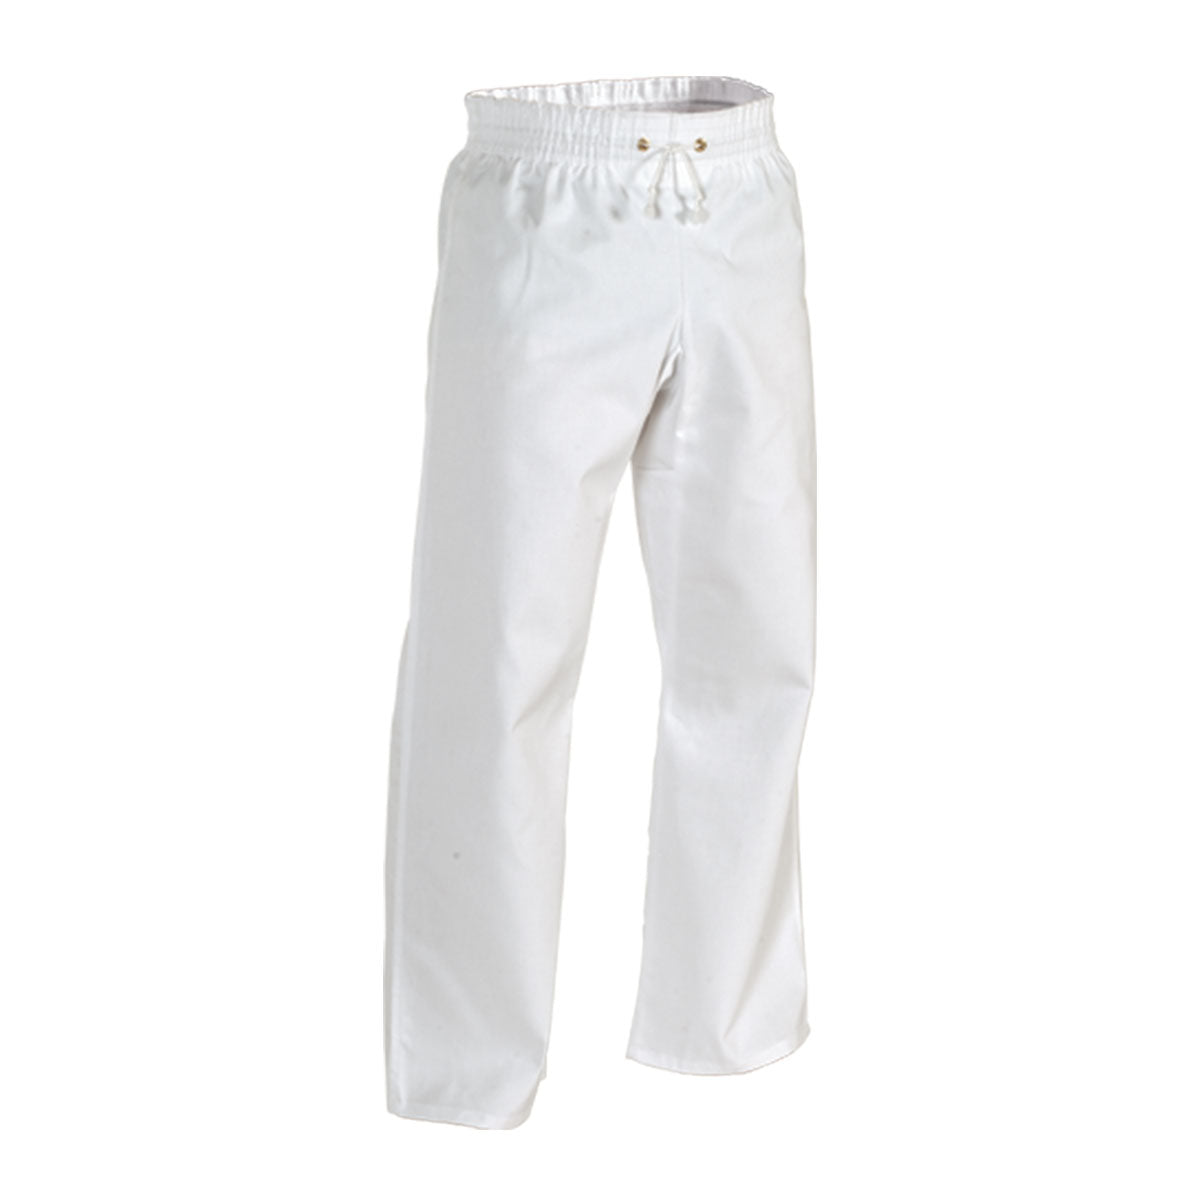 8 oz. Middleweight Contact Pants White